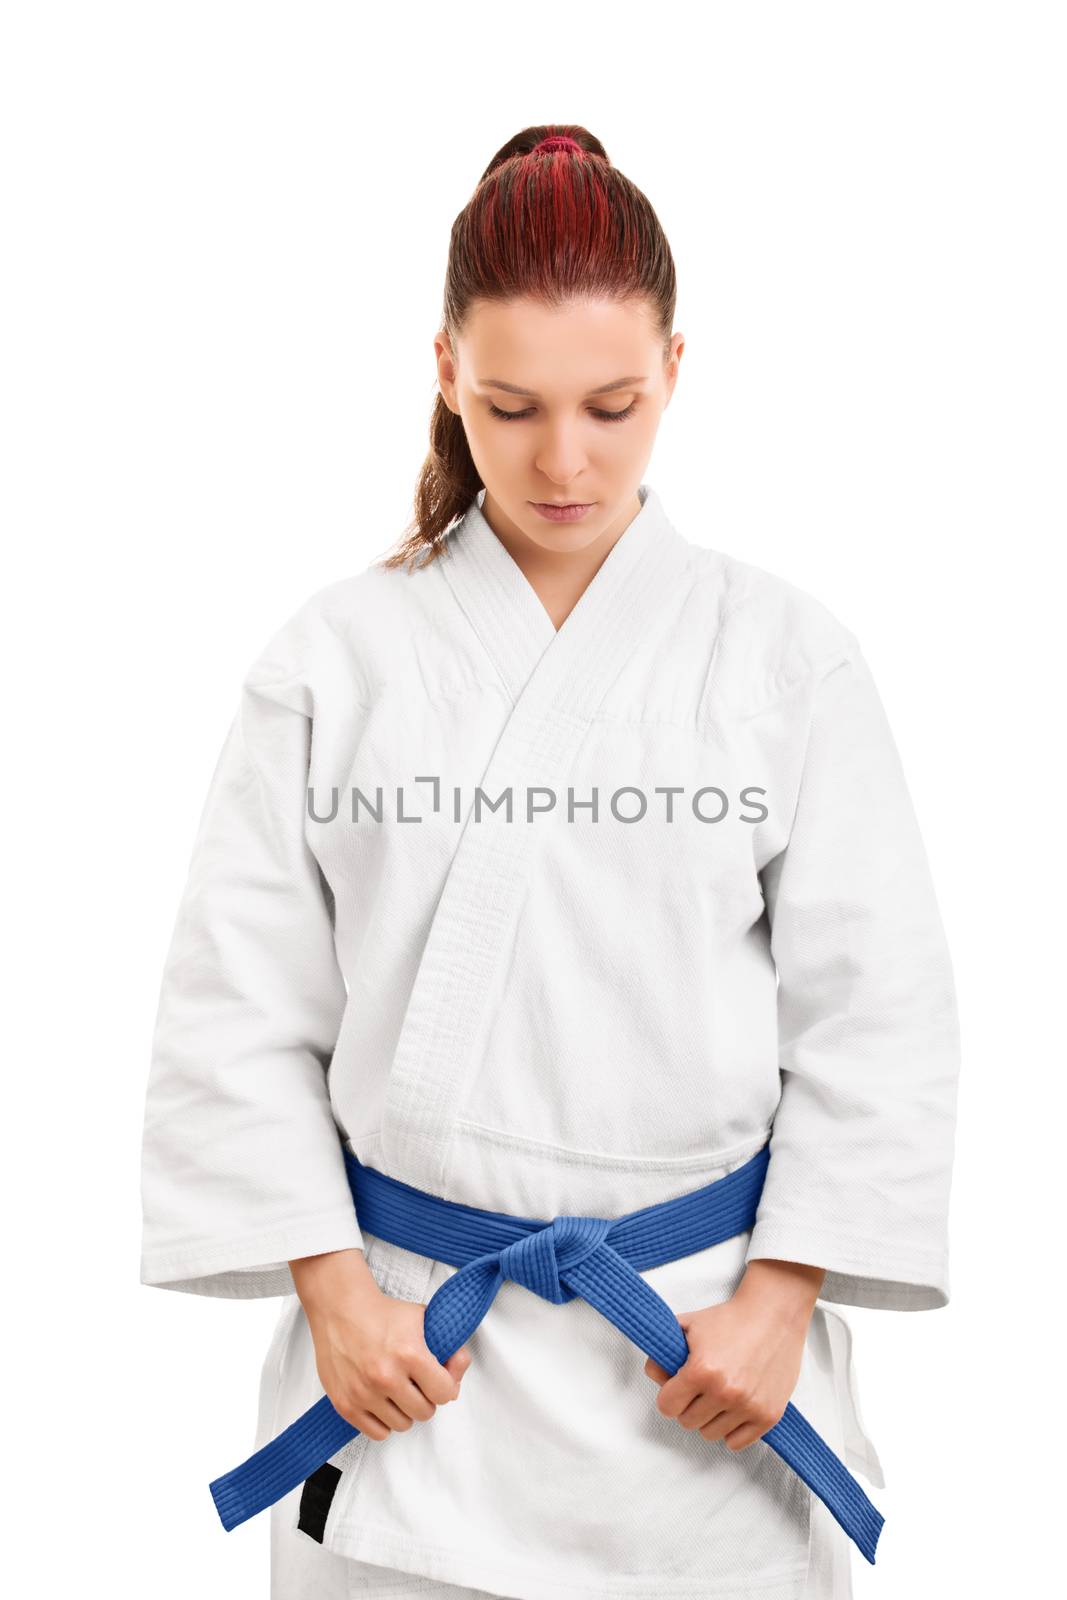 Portrait of a young female martial arts fighter in a white kimono holding her blue belt and looking down, isolated on white background. Concentrating before the fight. Giving respect concept.